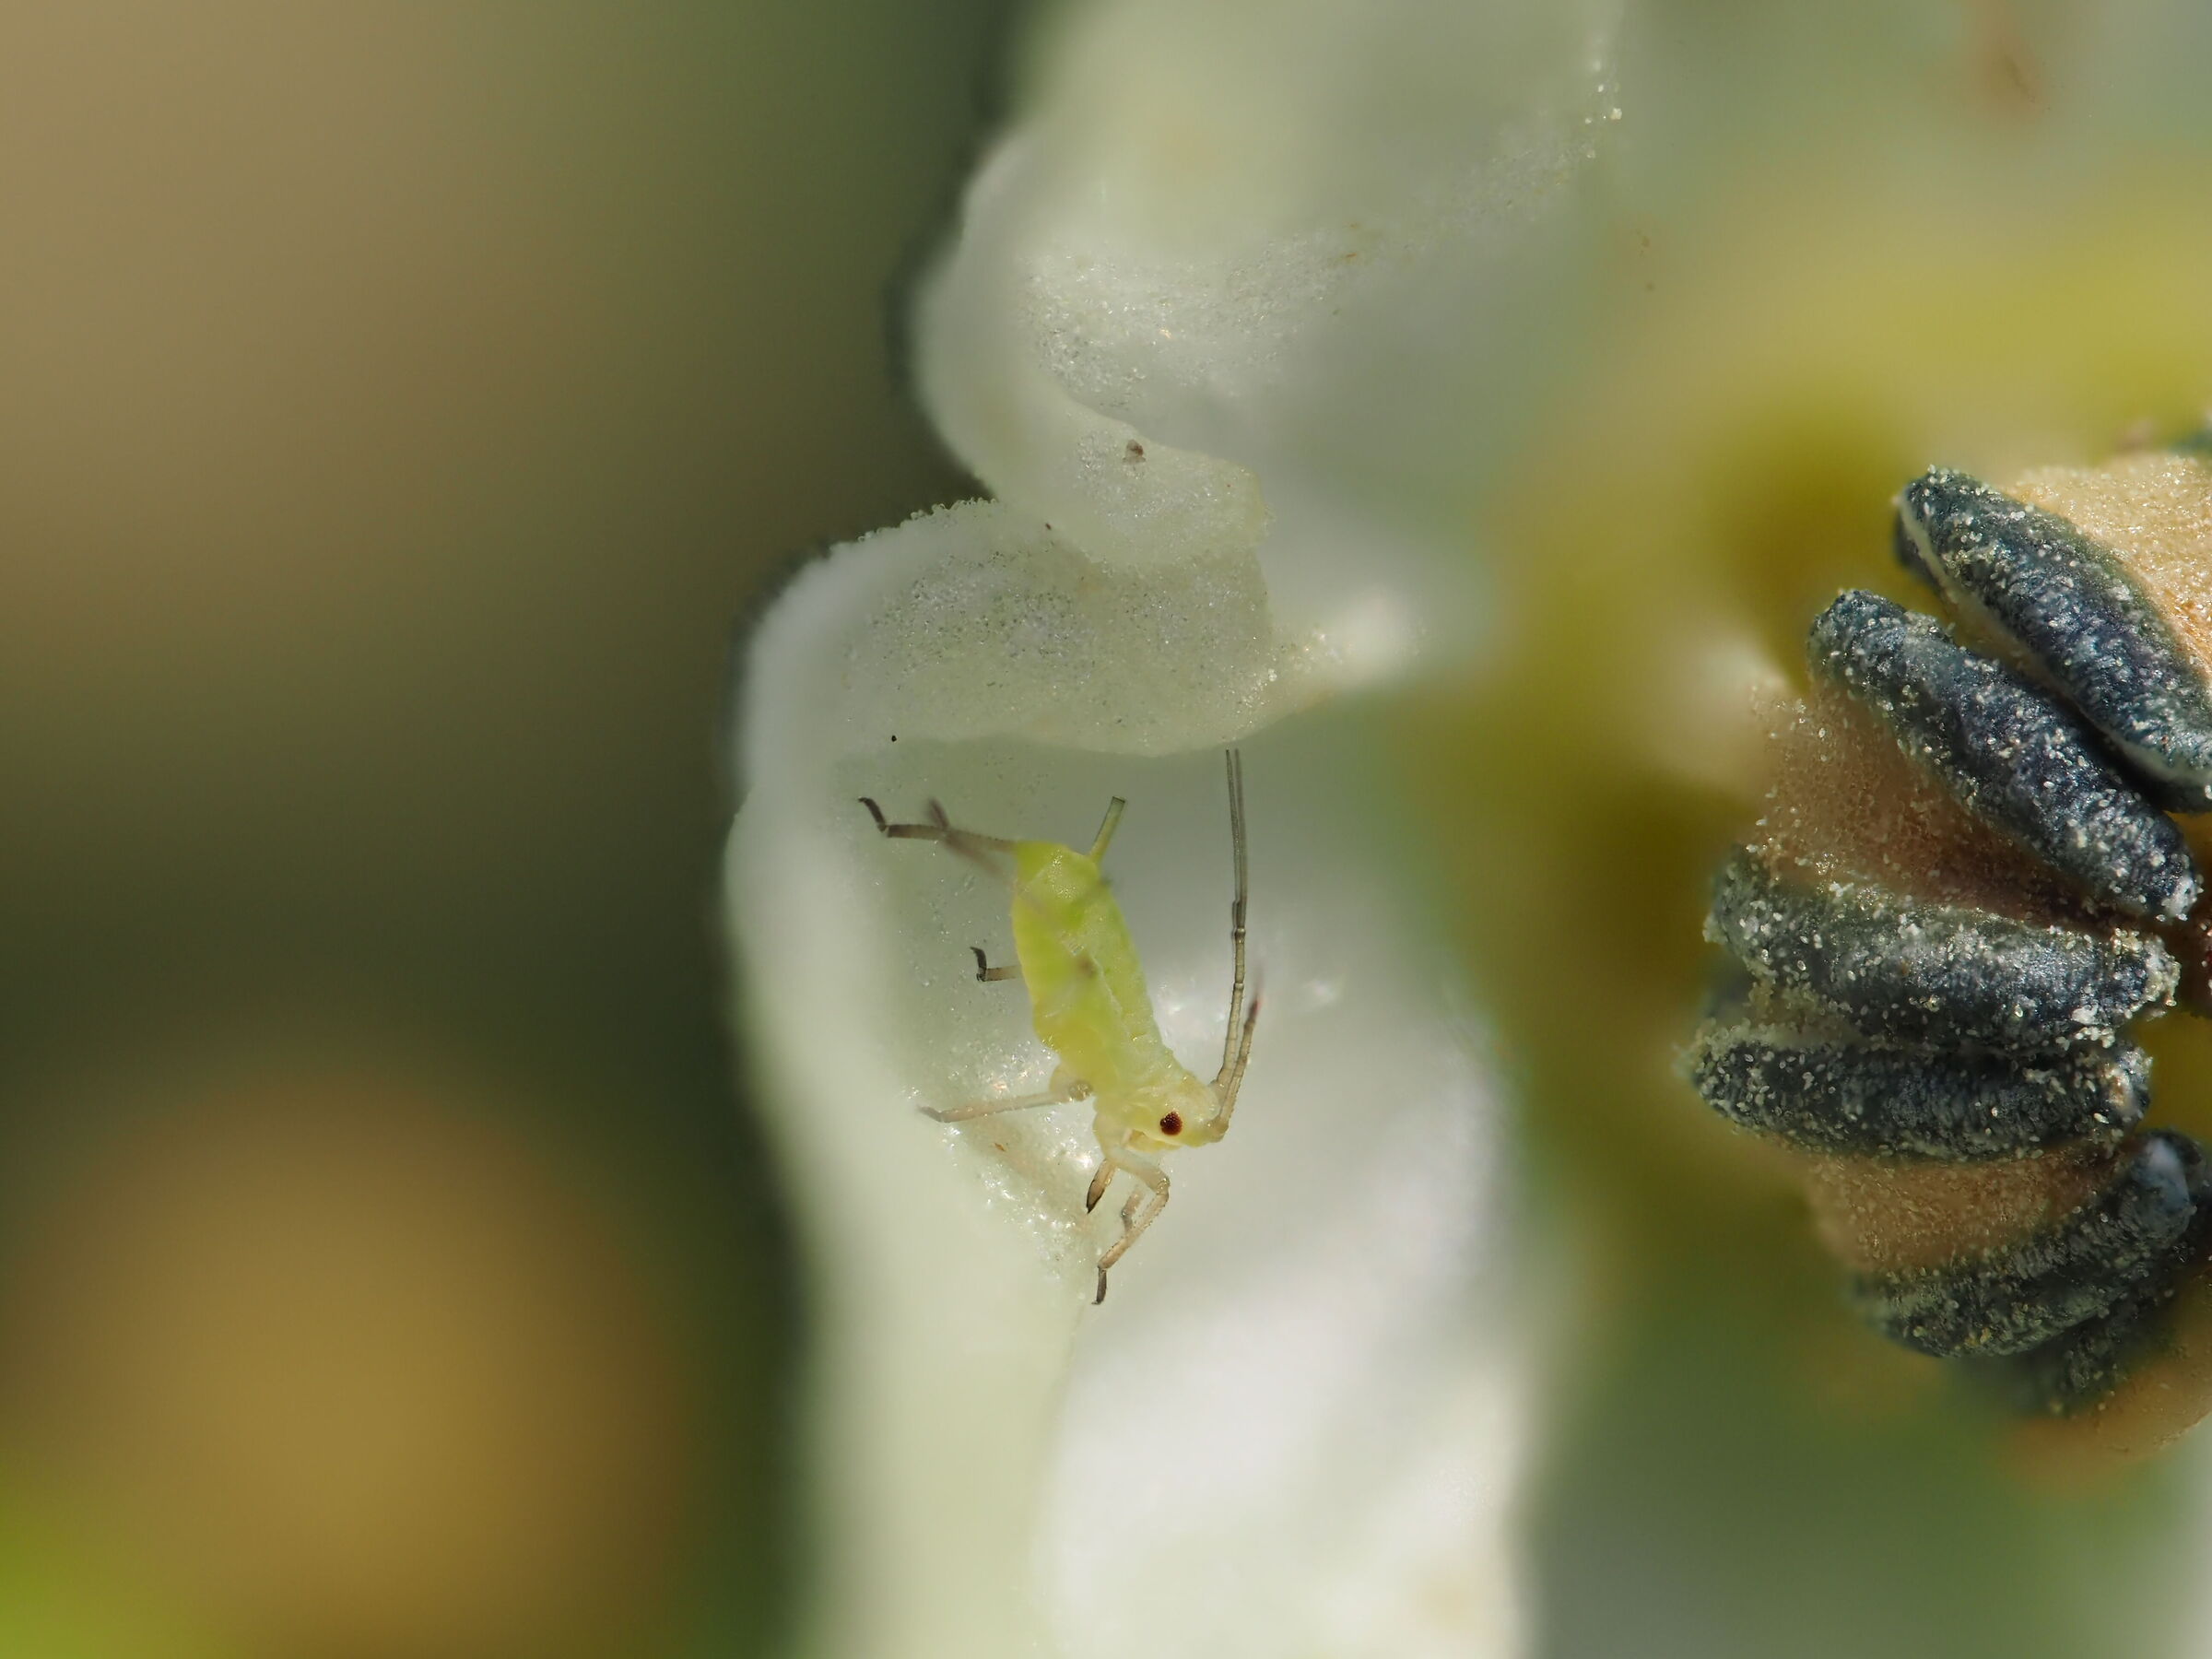 Aphid on chili flower...